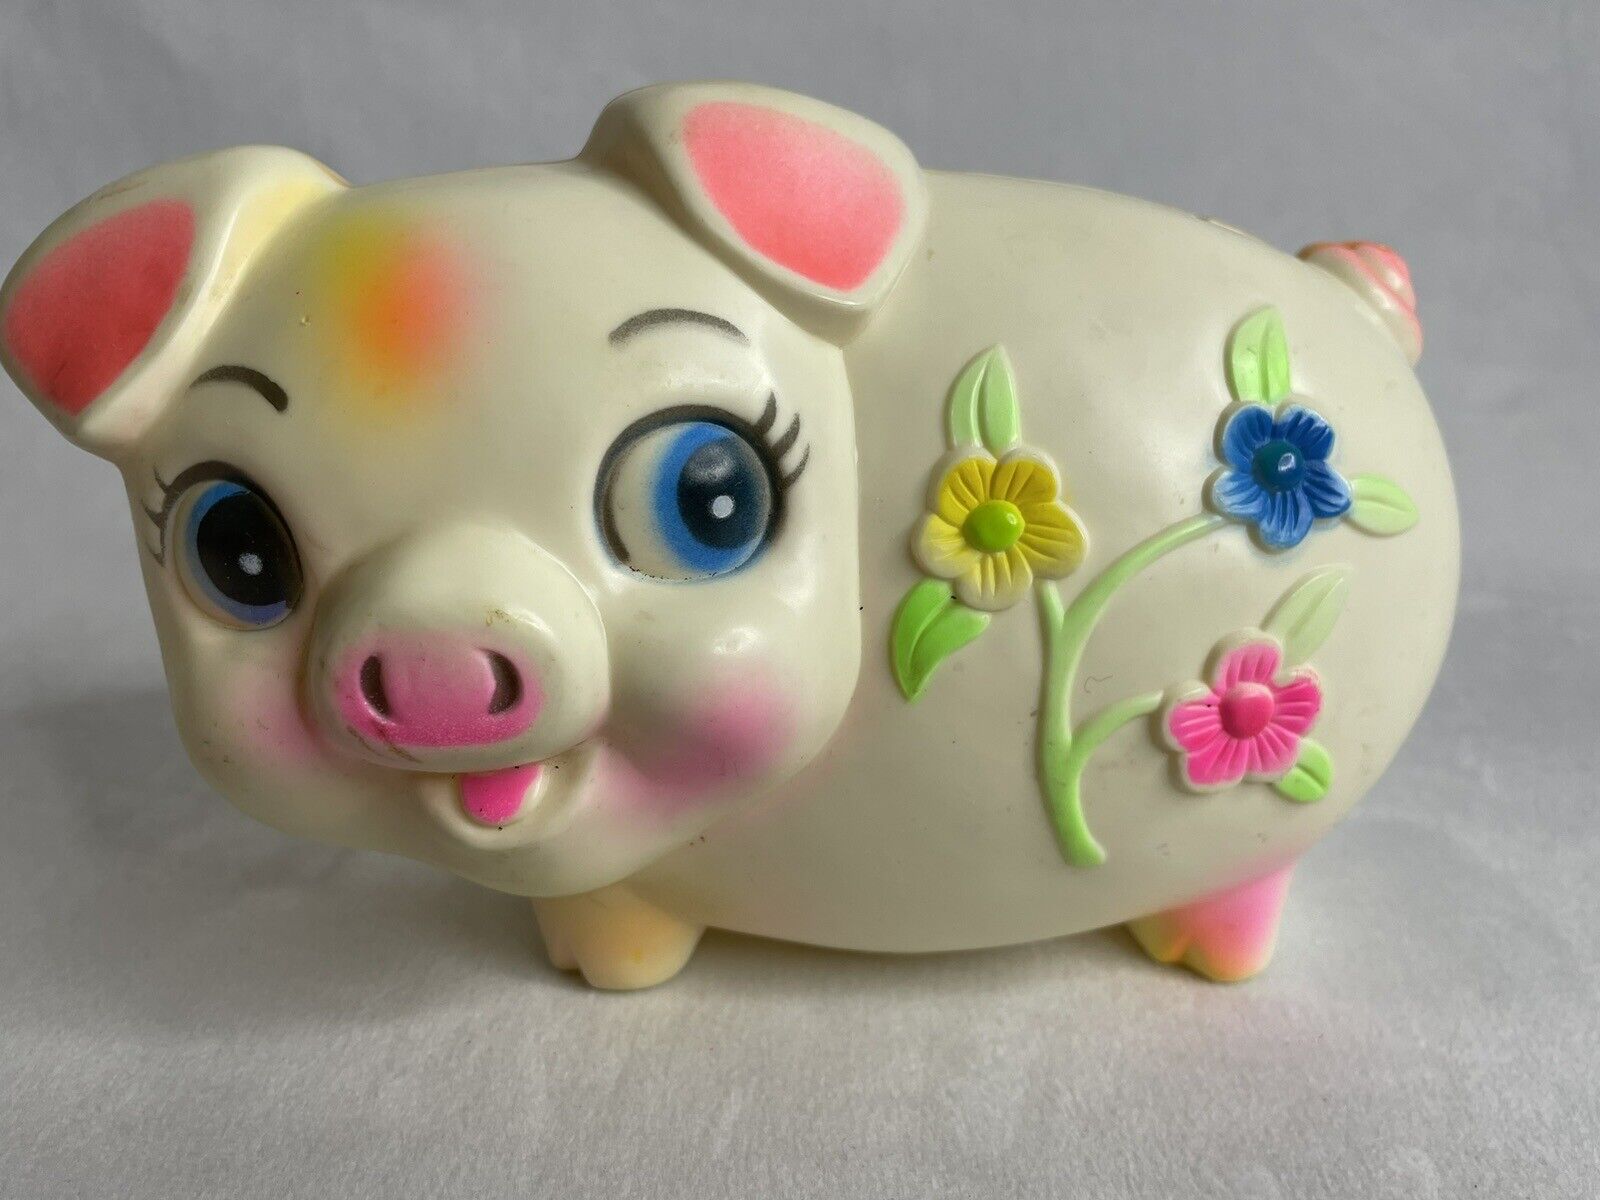 Vintage Plastic 1977 Piggy Bank From Sanitoy Flowers White Yellow Blue Pink